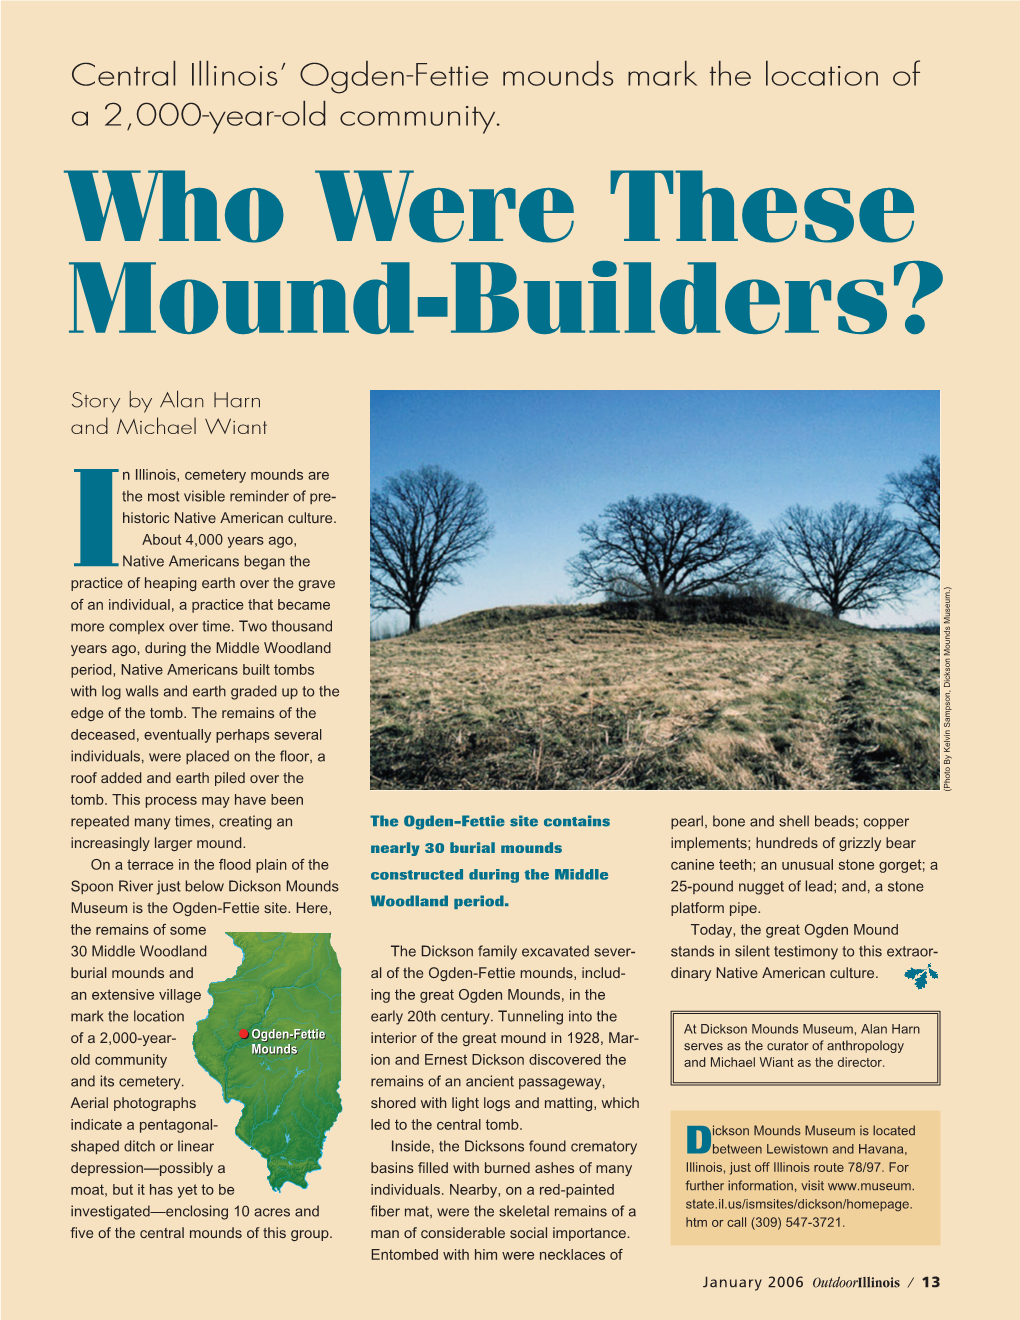 Who Were These Mound-Builders?